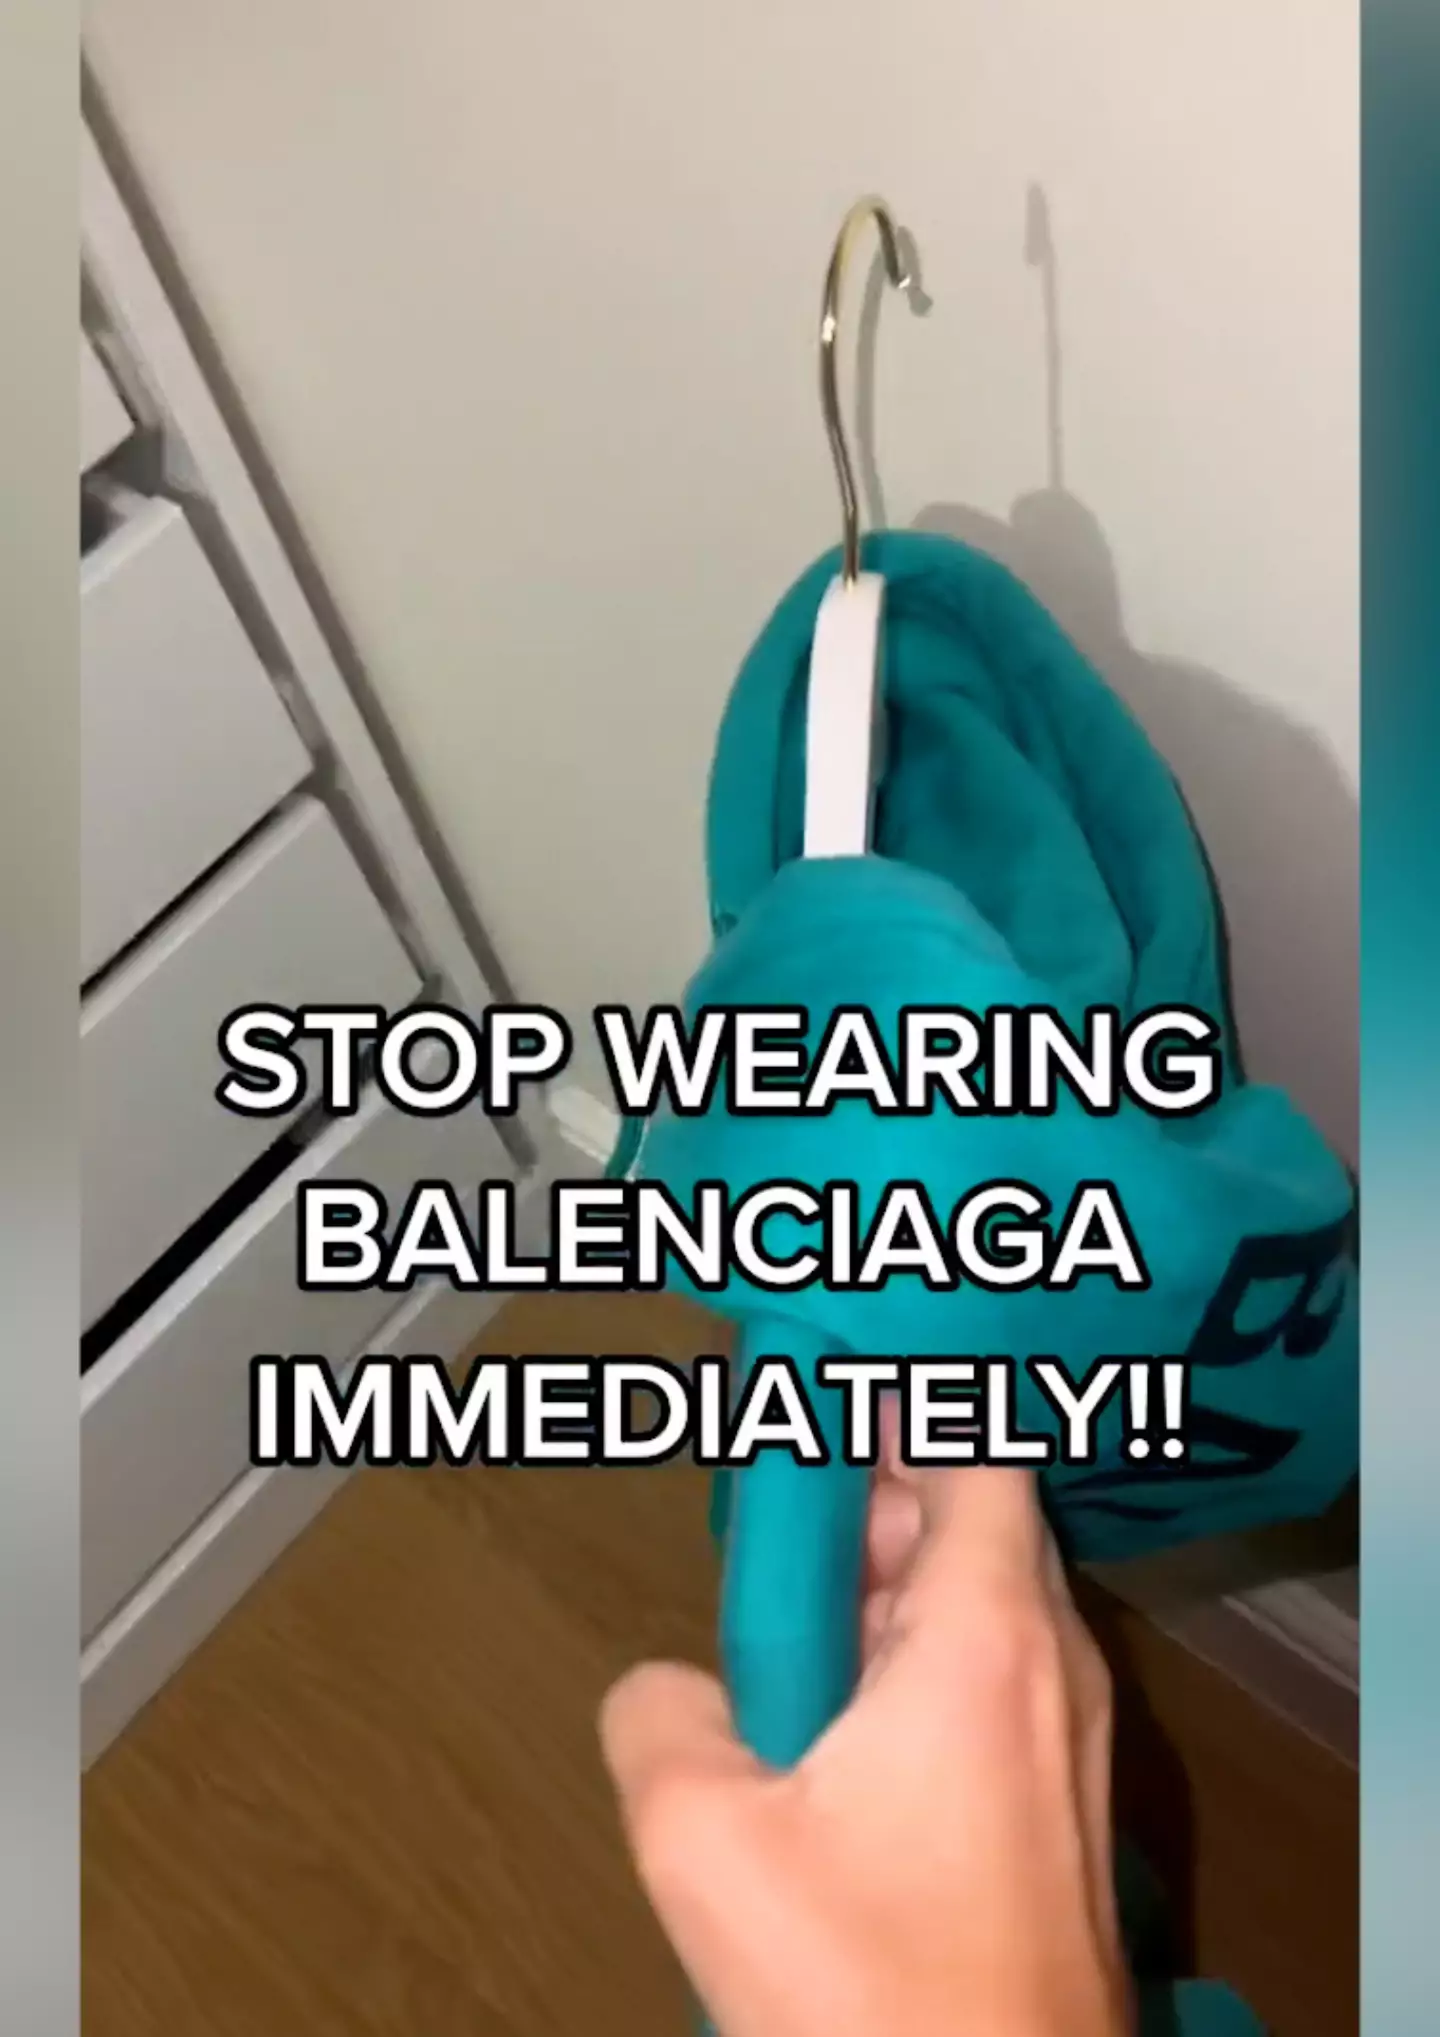 Chloe decided to destroy all of her Balenciaga clothes and accessories.